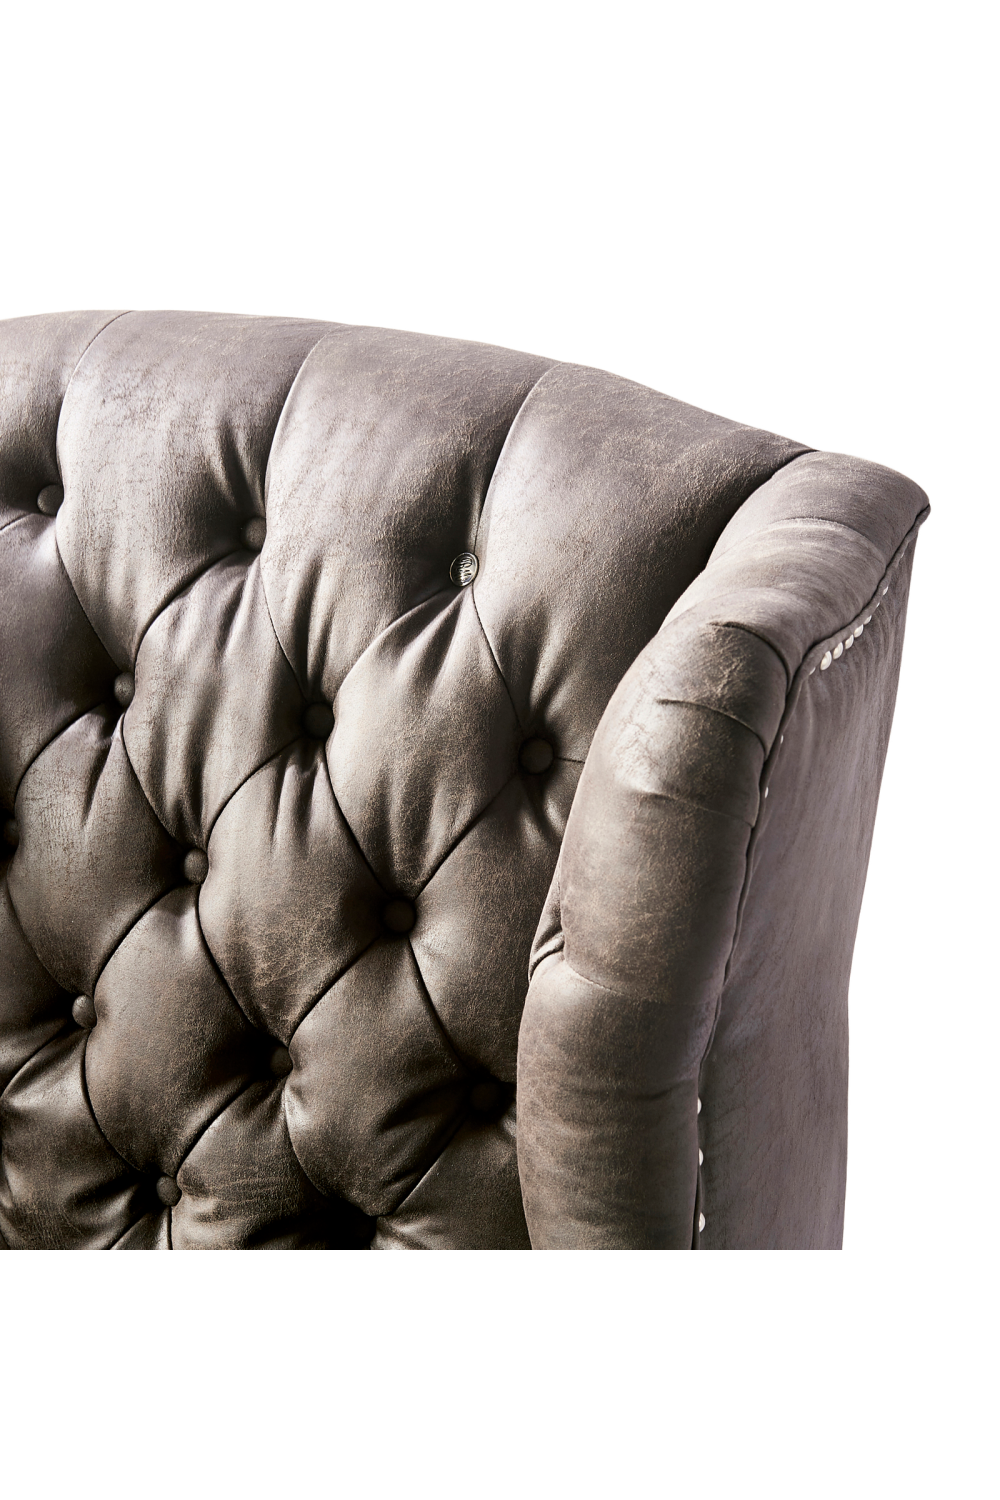 Classic Tufted Wing Chair | Rivièra Maison Franklin Park | Woodfuniture.com